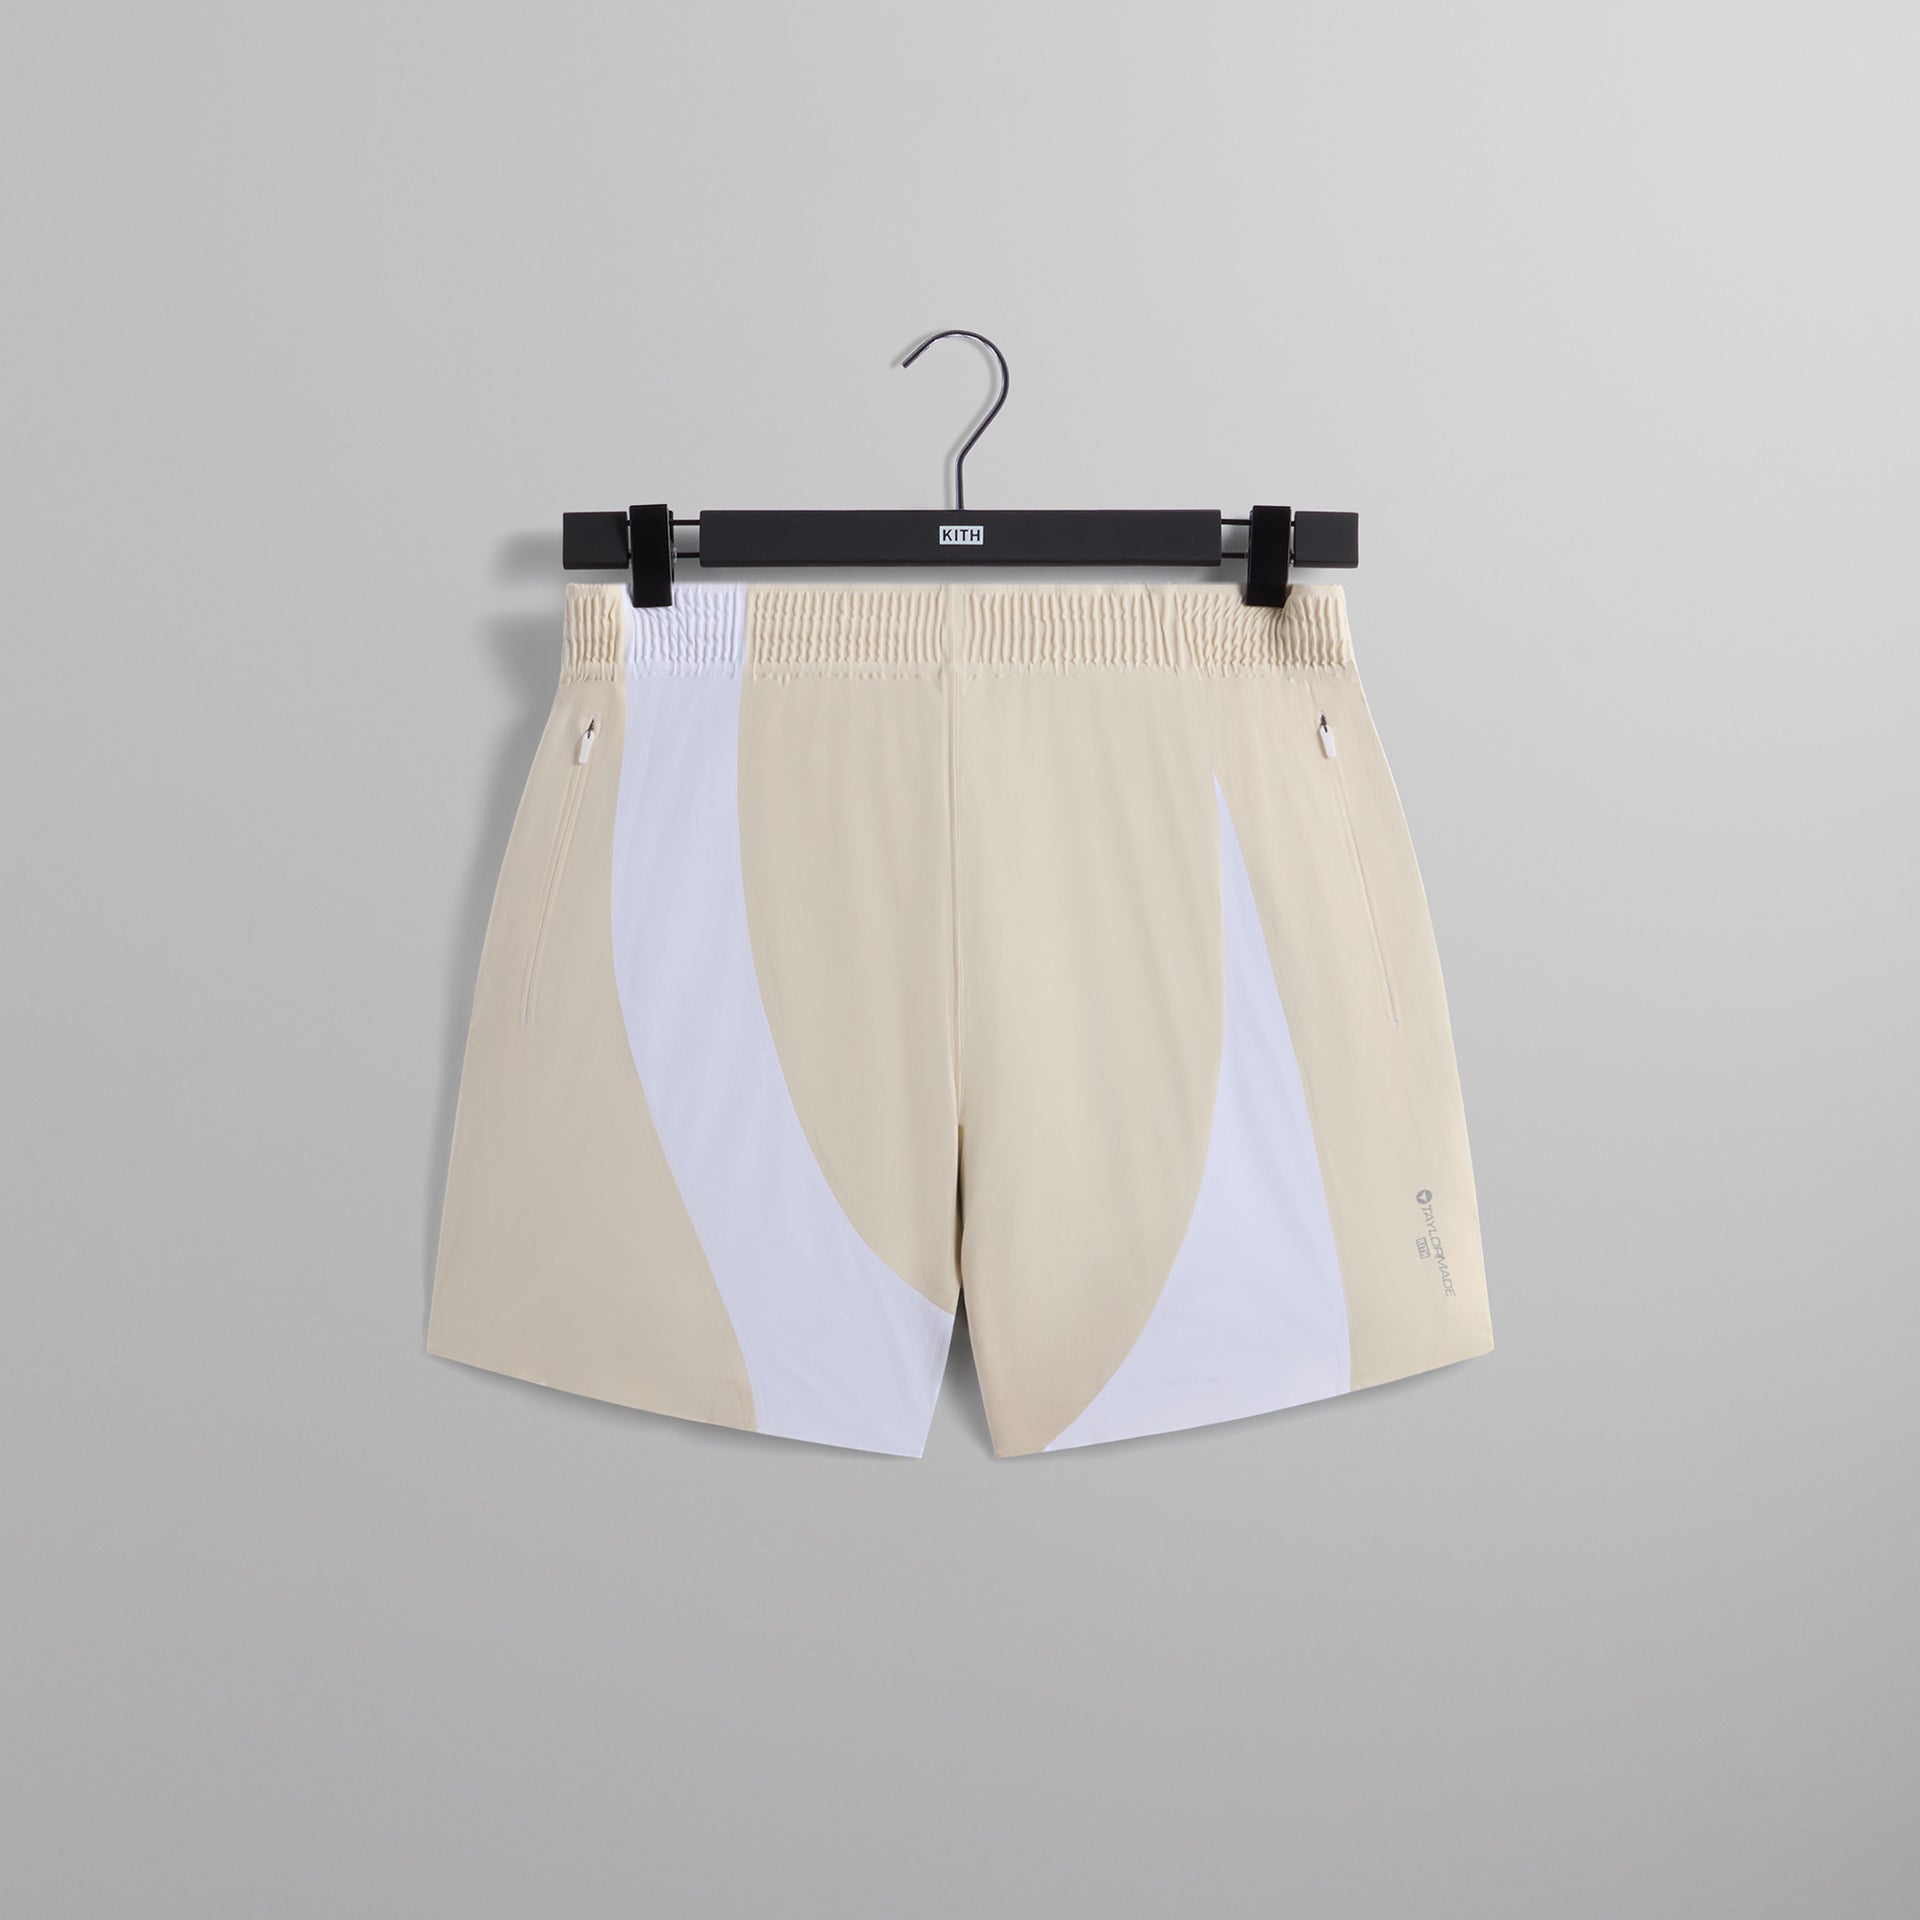 Kith for TaylorMade Fringe Short - Silk